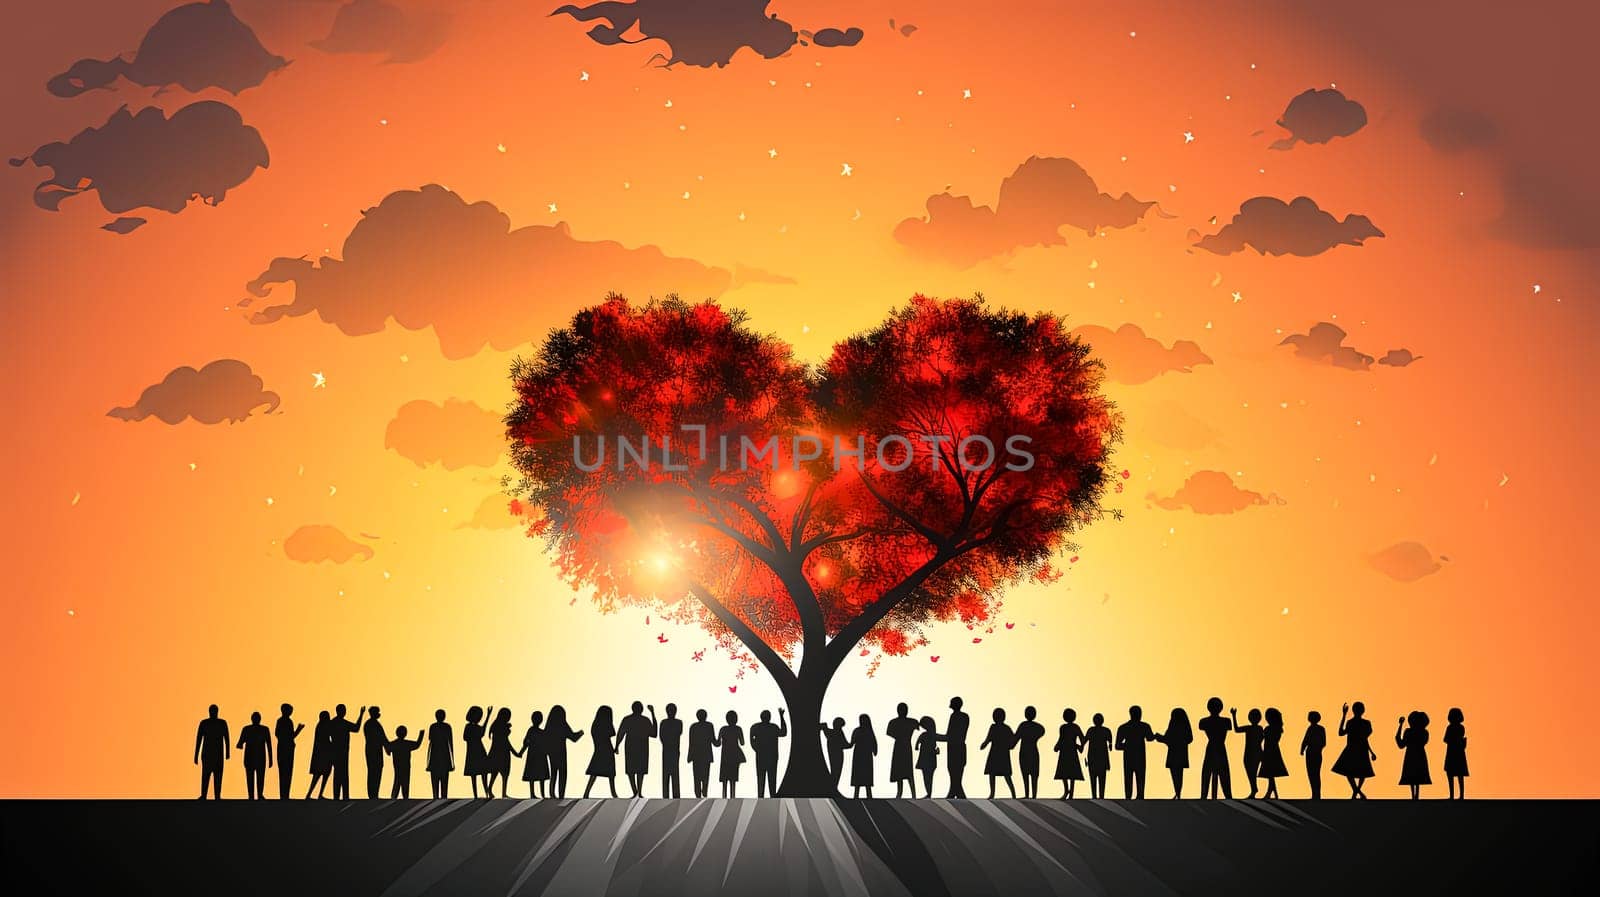 Celebrate love with a Valentines Day illustration featuring silhouettes of people by Alla_Morozova93